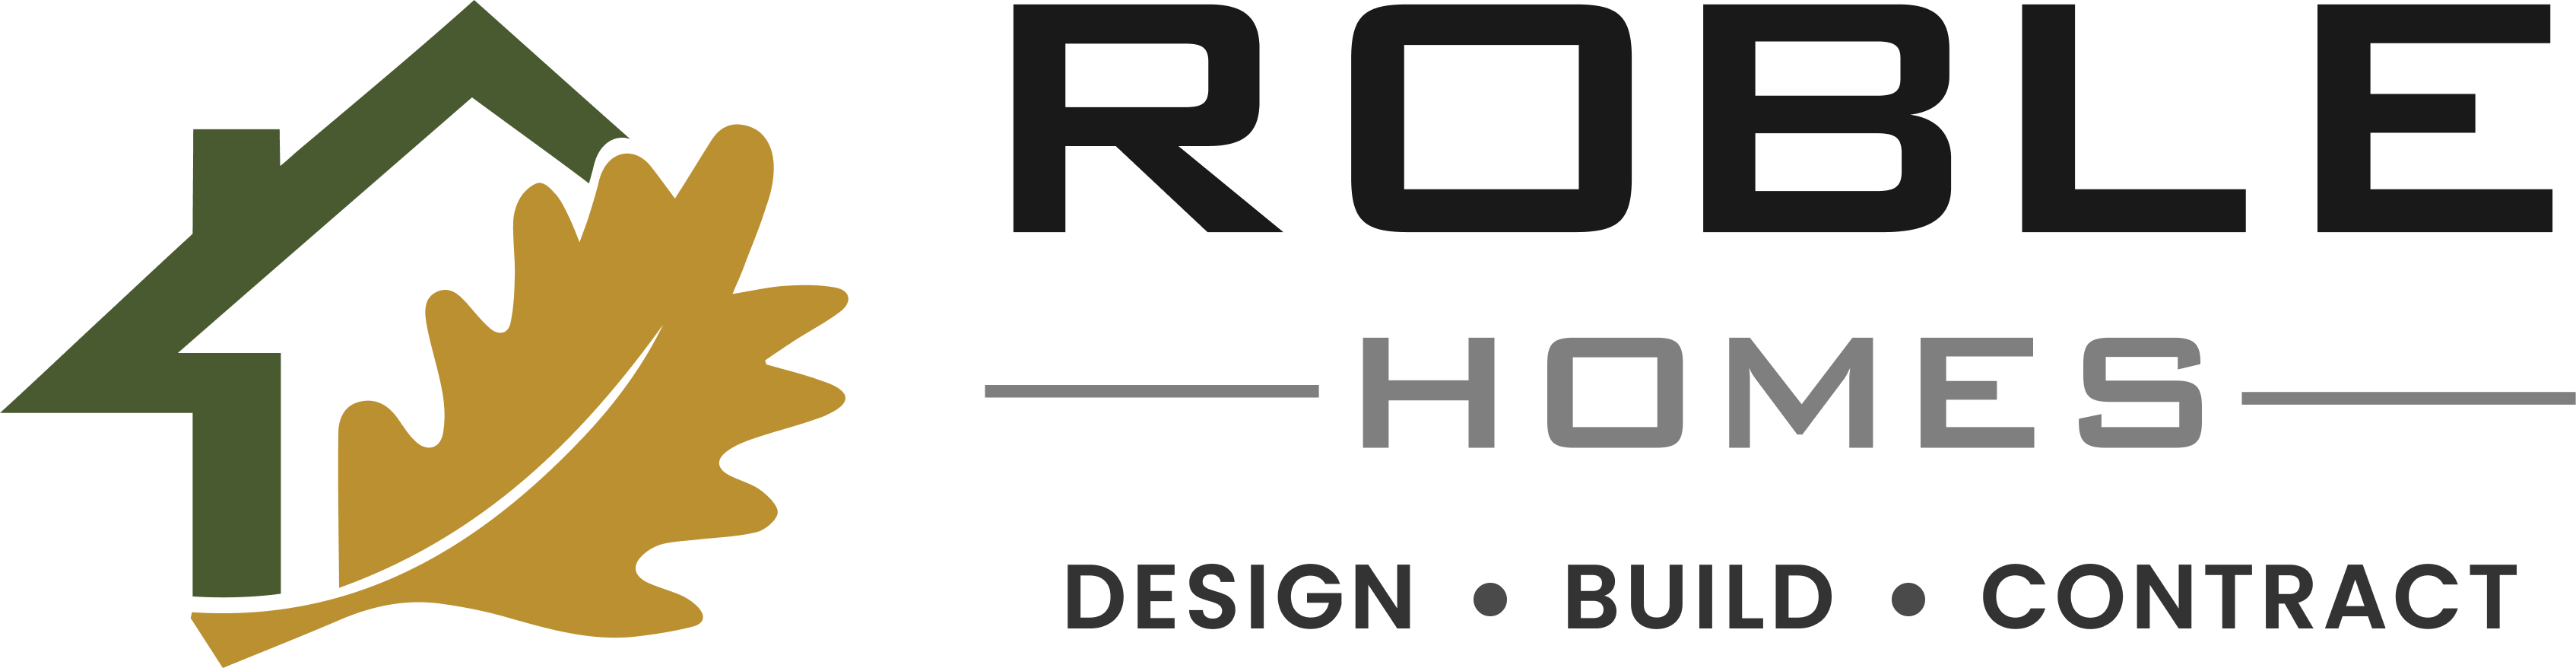 Roble Homes